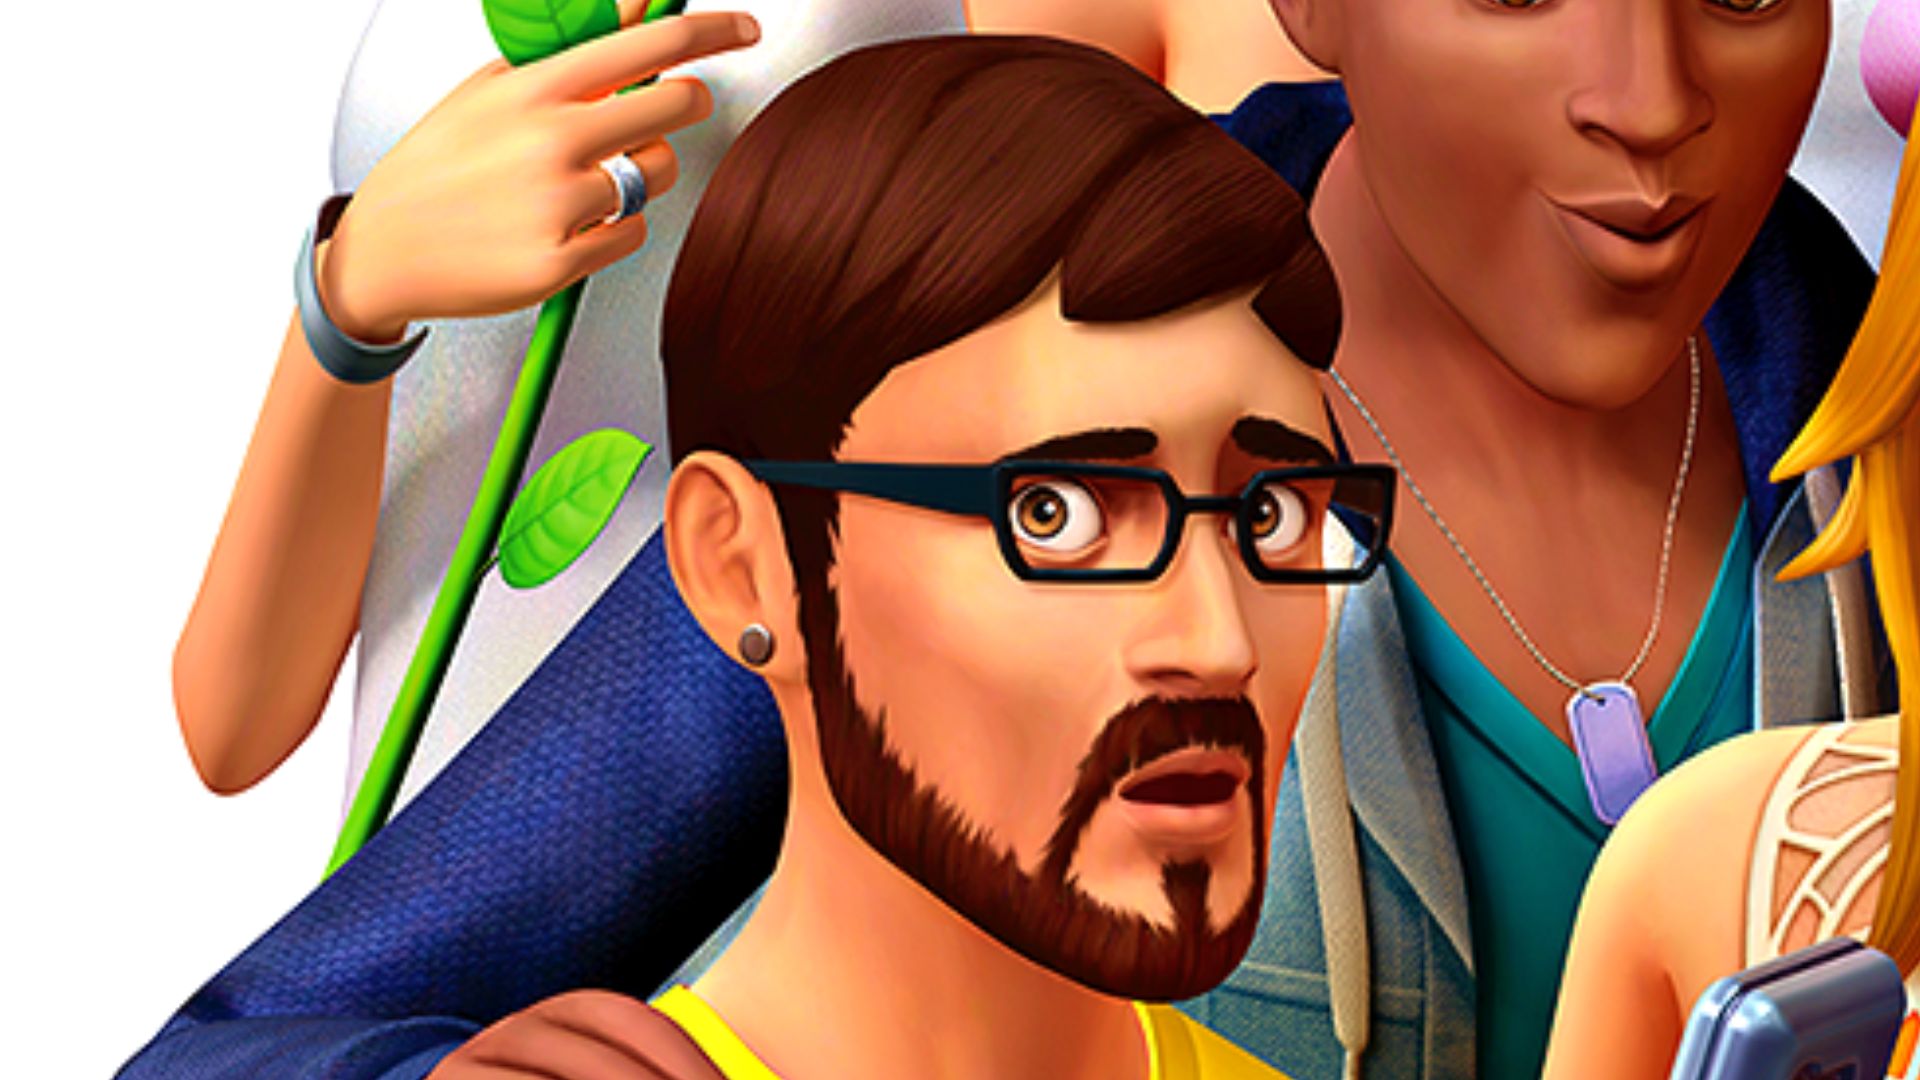 A Sims 5 playtester has allegedly pirated the game already